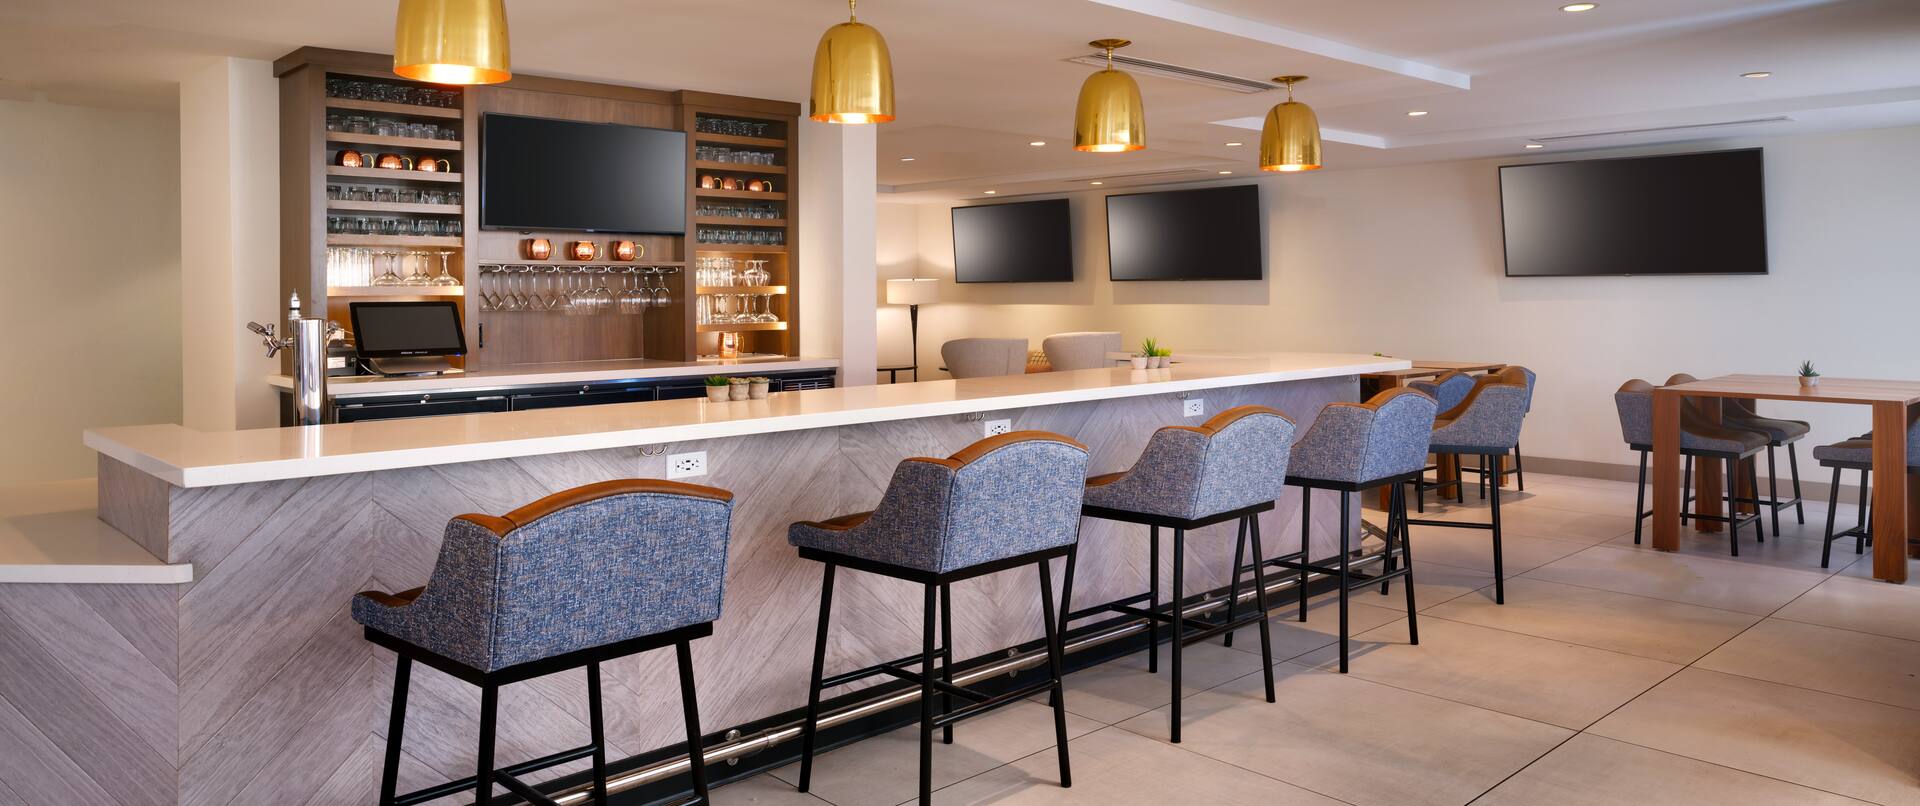 Bar Area with Four HDTVs and Chairs